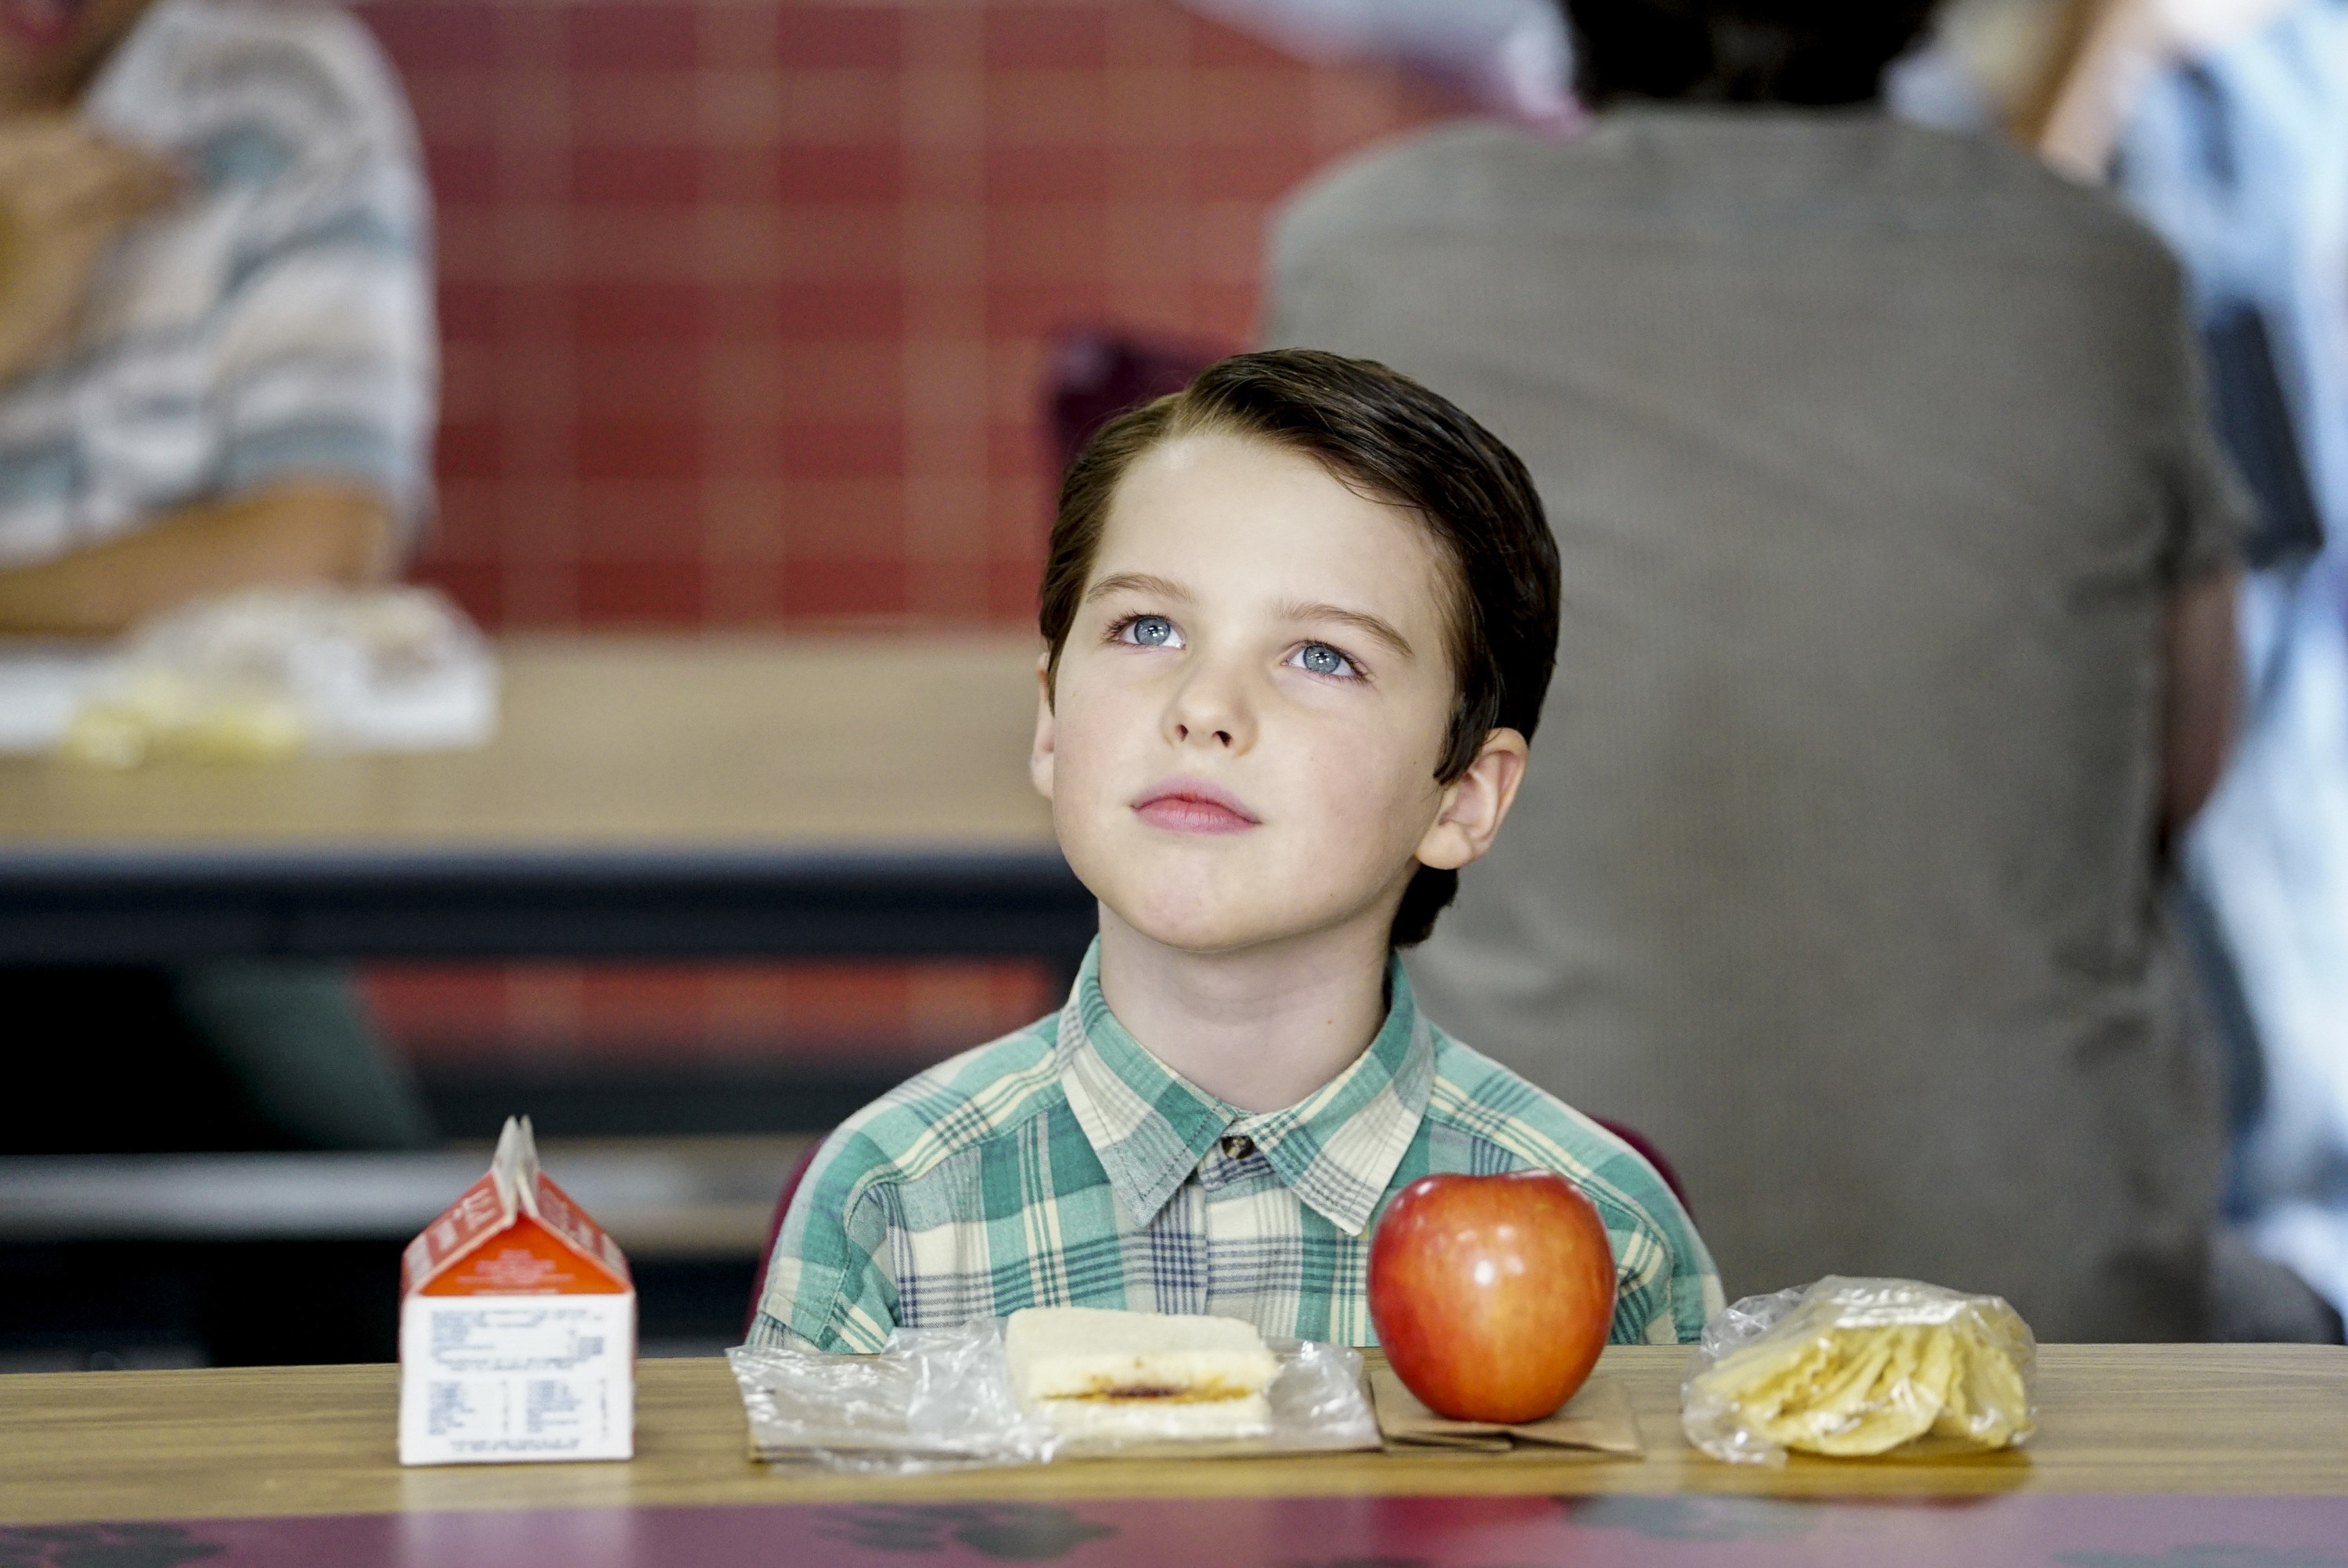 young sheldon at school lunch with an apple, sandwich, and milk in front of him